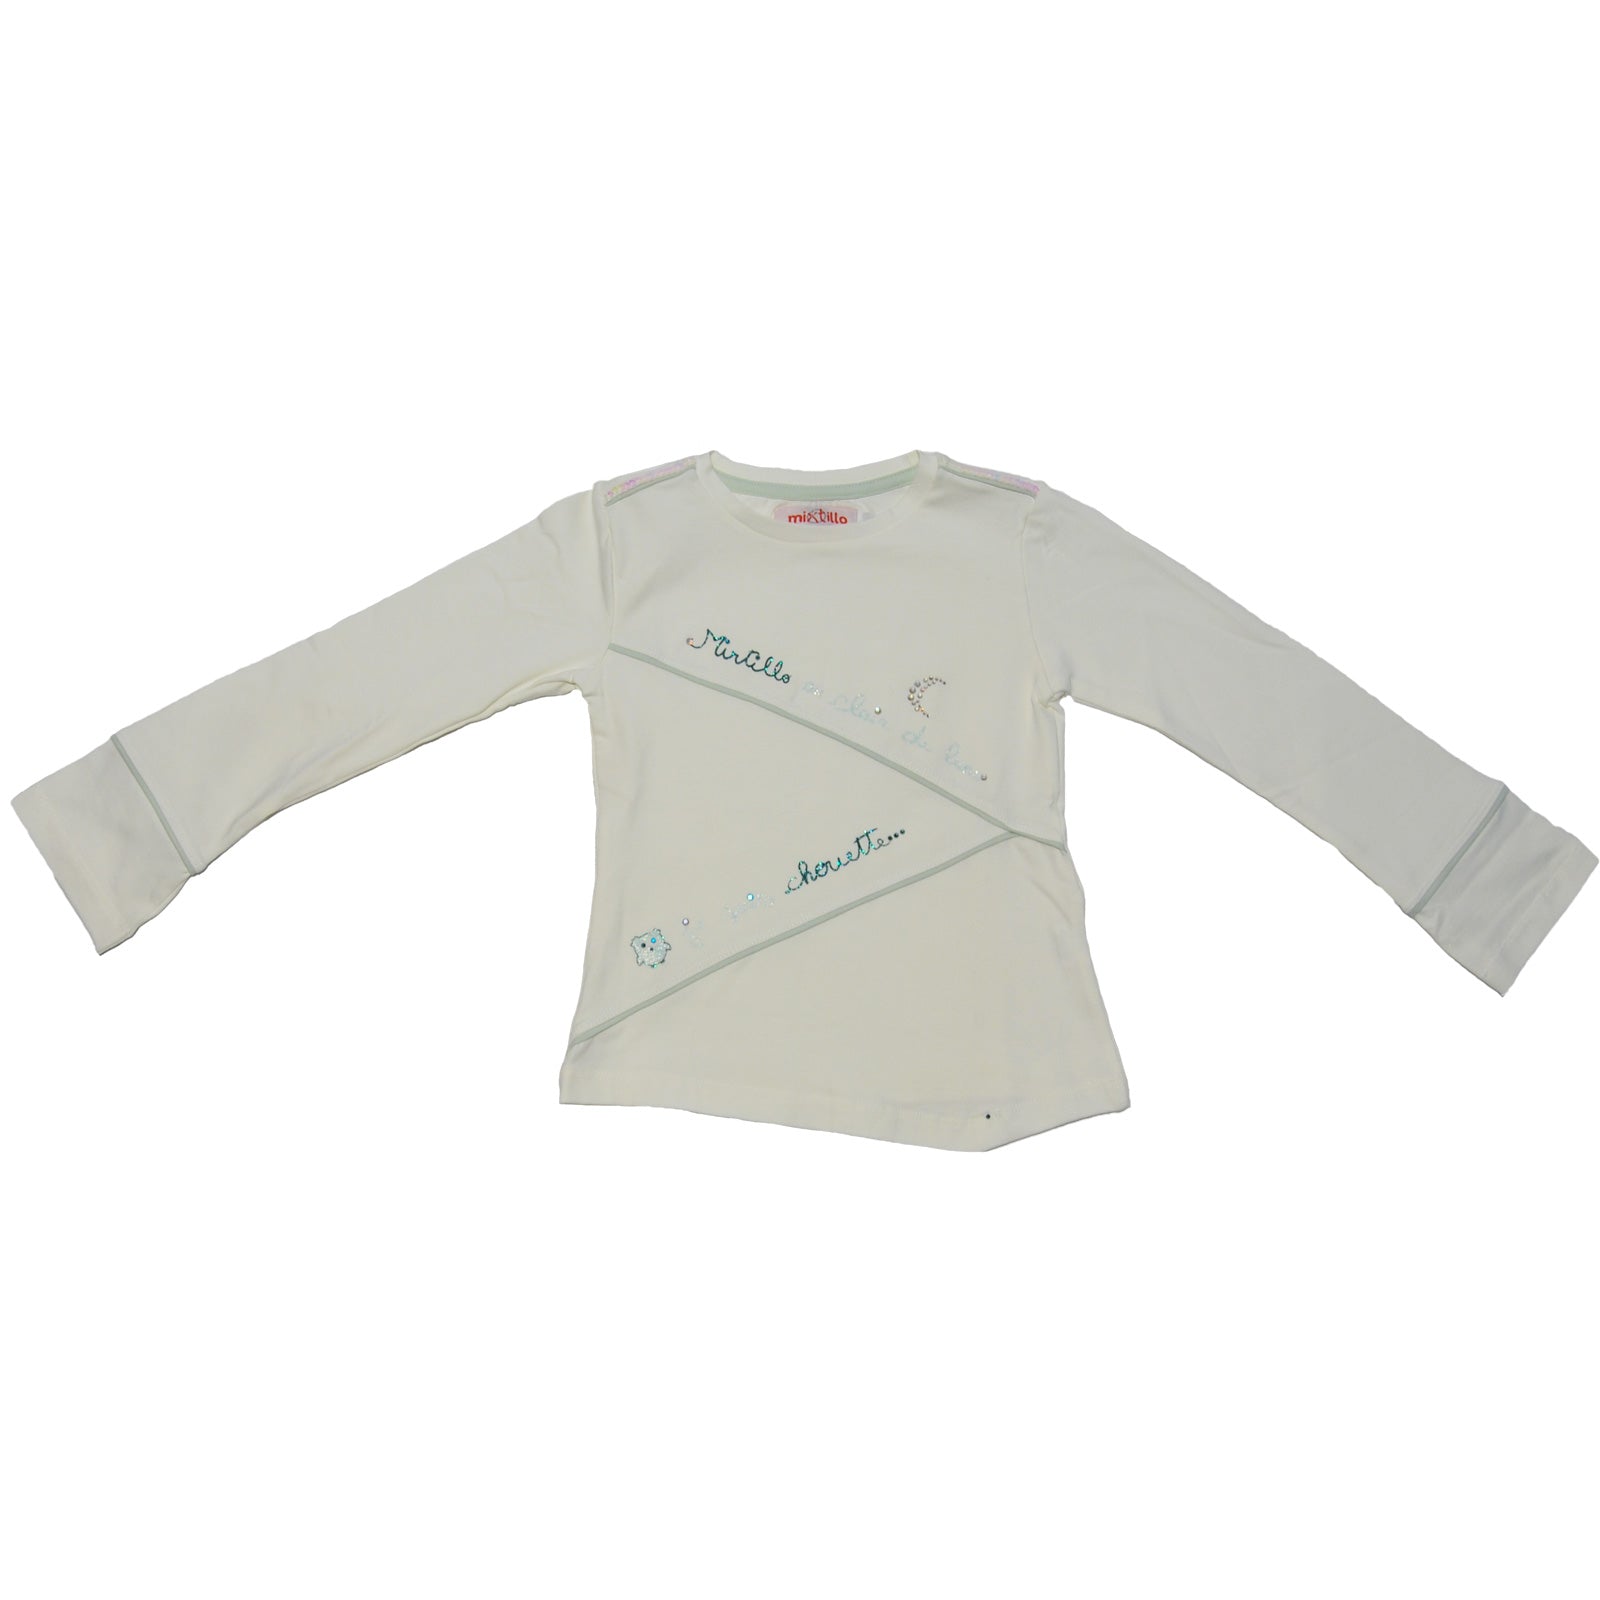 
  Long-sleeved T-shirt from the Mirtillo girl's clothing line with front, prints, stitching and ...